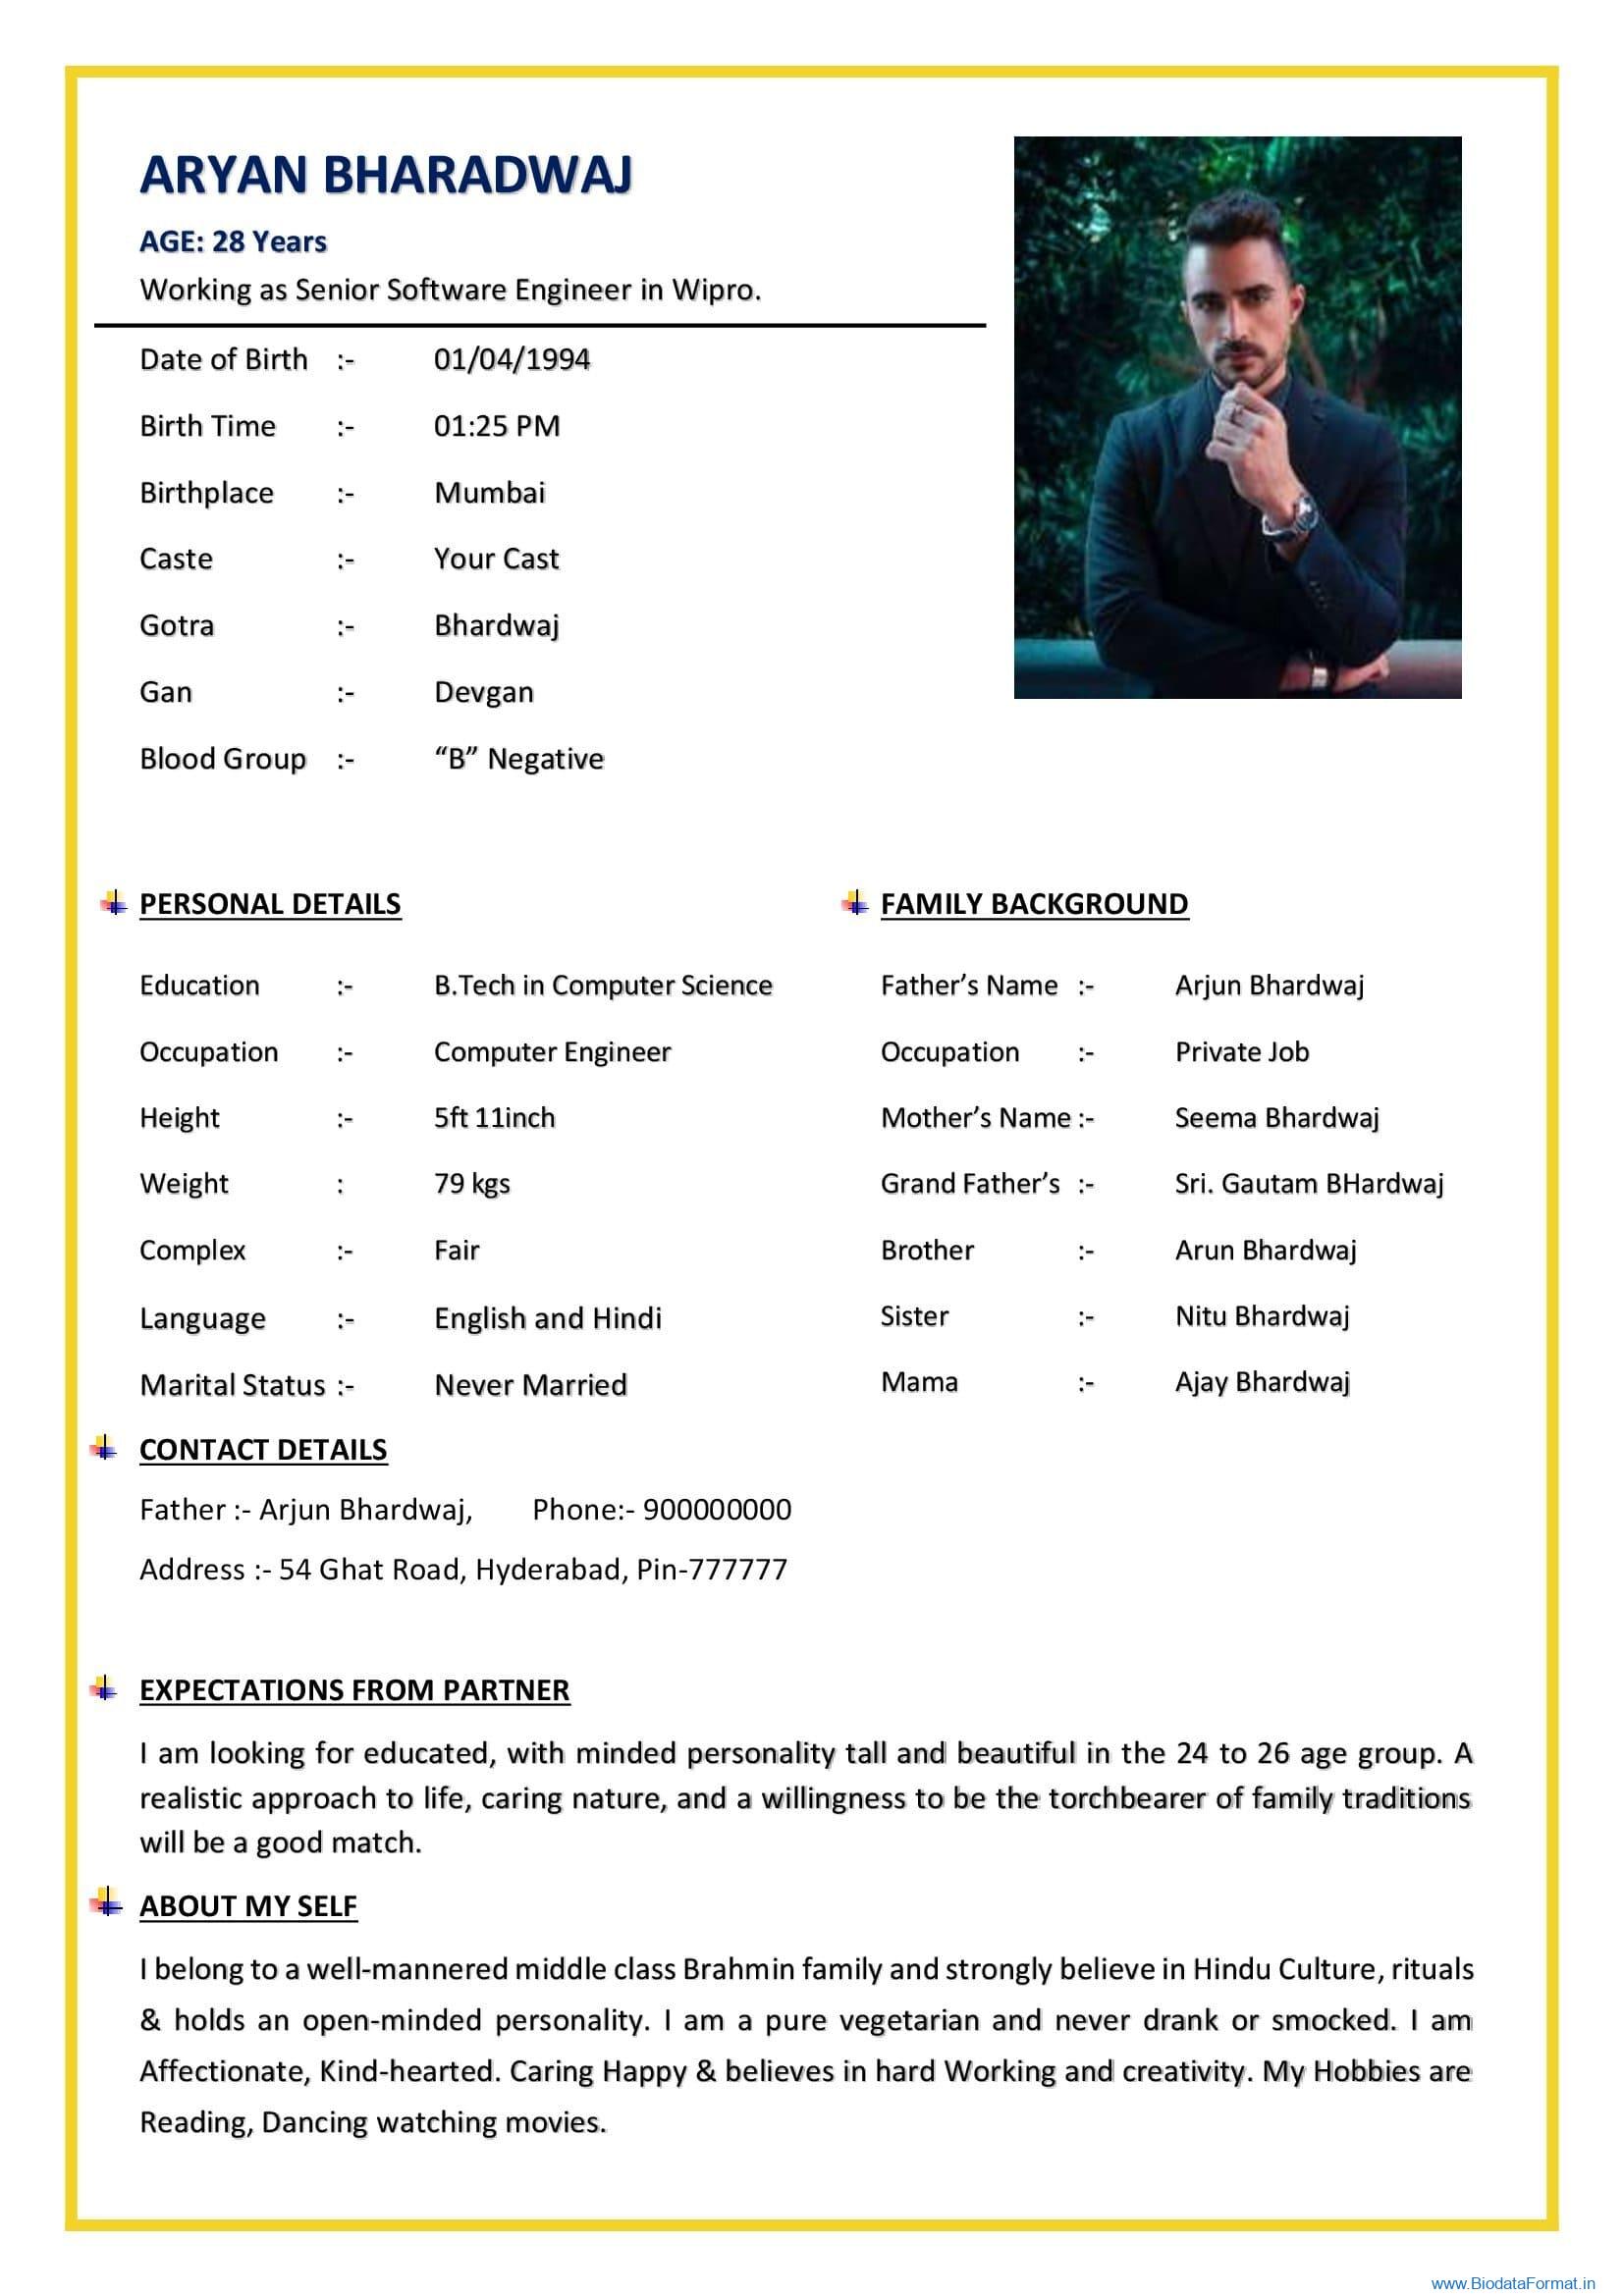 Marriage Biodata For Boys Color Format 2 7964